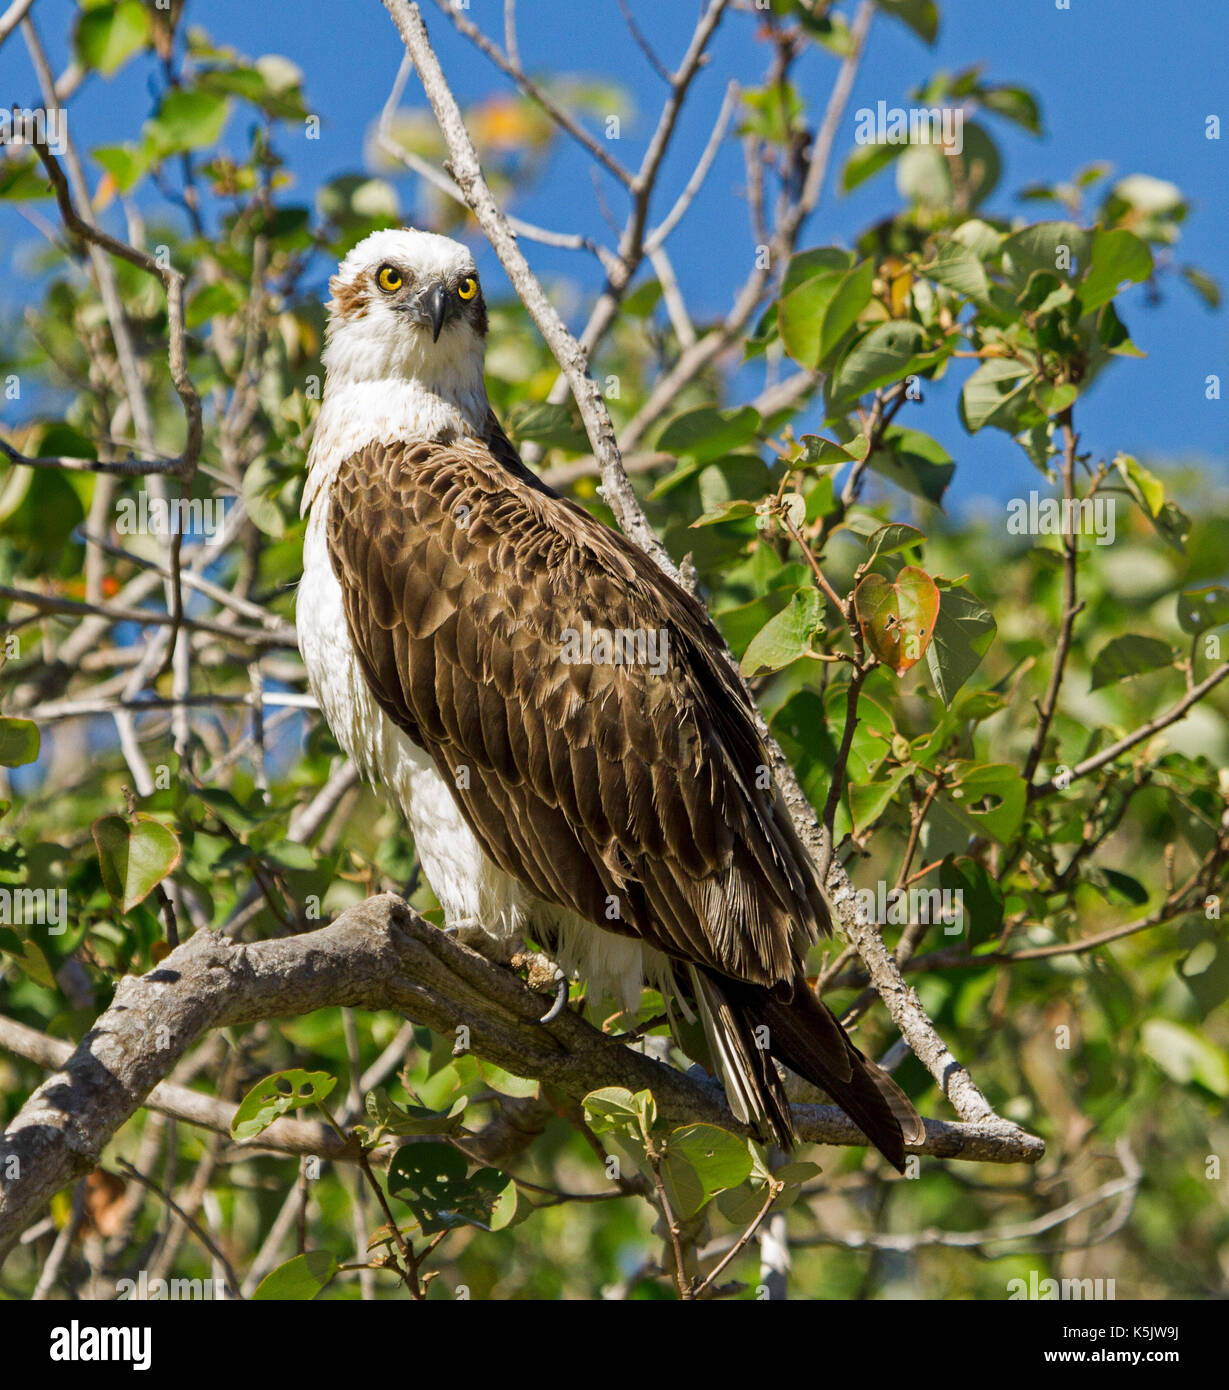 Osprey, Pandion cristatus, with eyes staring directly at camera, against background of emerald foliage & blue sky at Hervey Bay, Qld, Australia Stock Photo